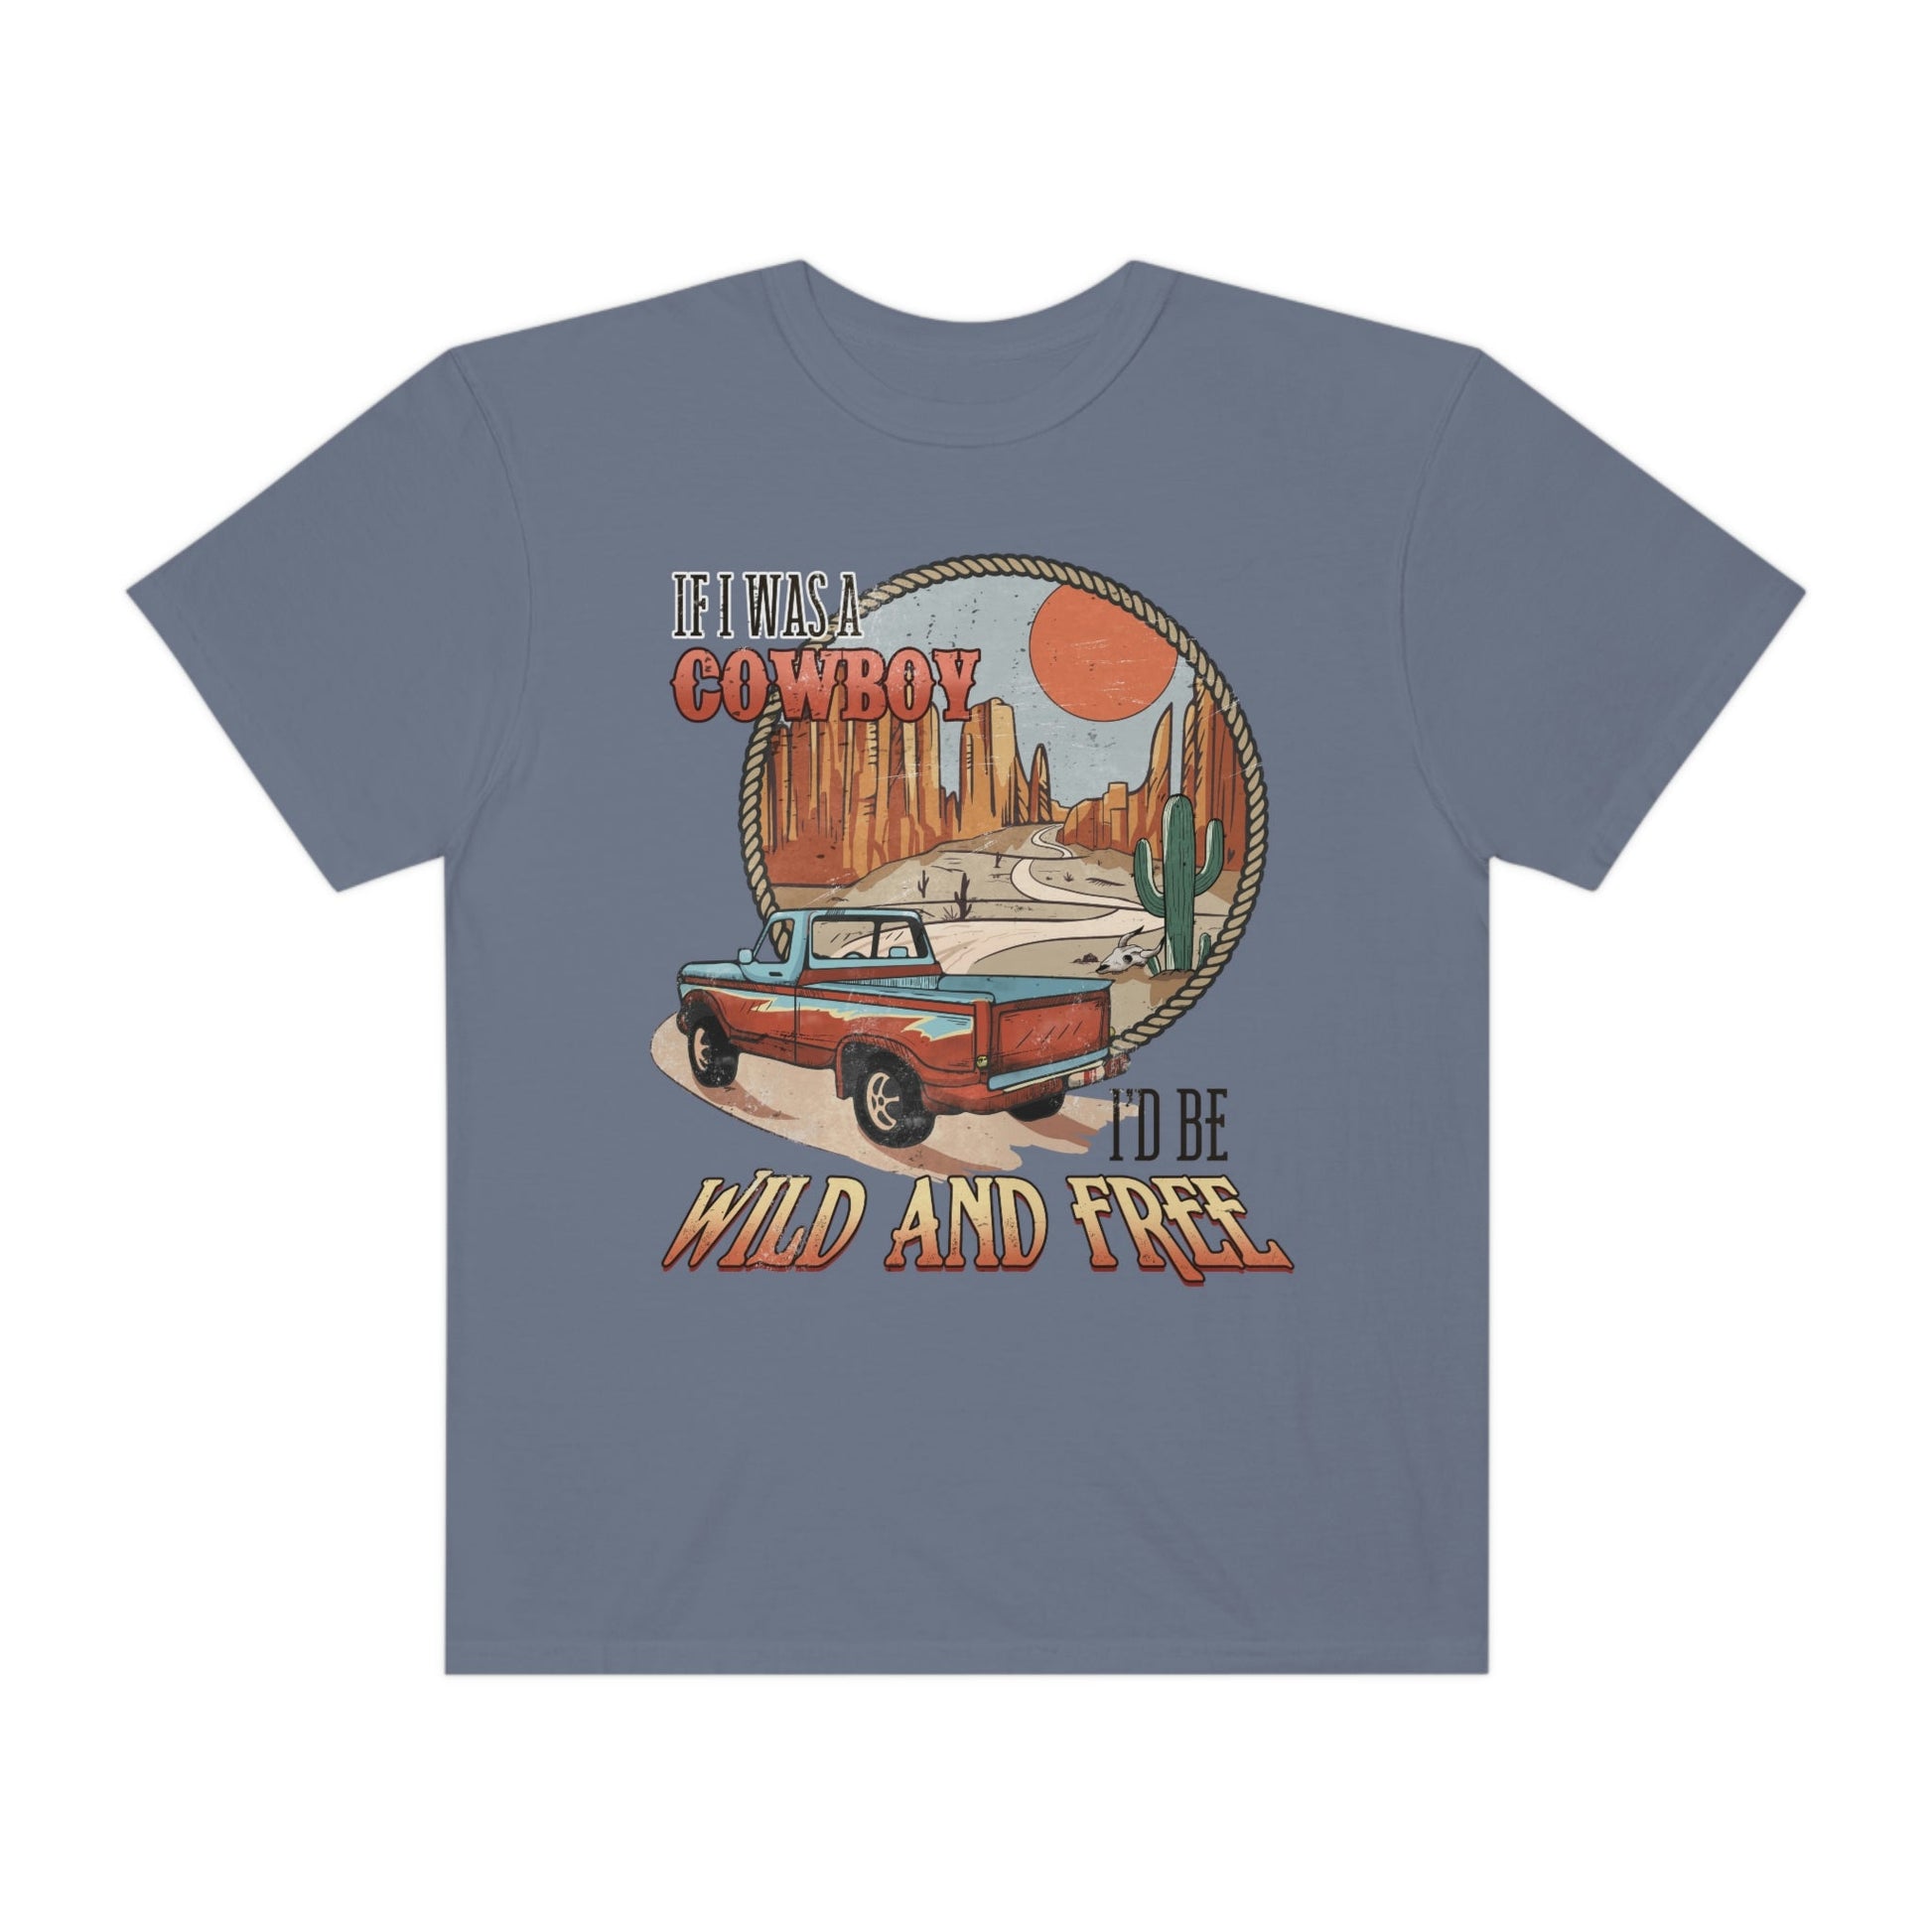 Wild and Free Cowboy Shirt, Comfort Colors Western Graphic Tee for Cowboys and Cowgirl T-Shirt